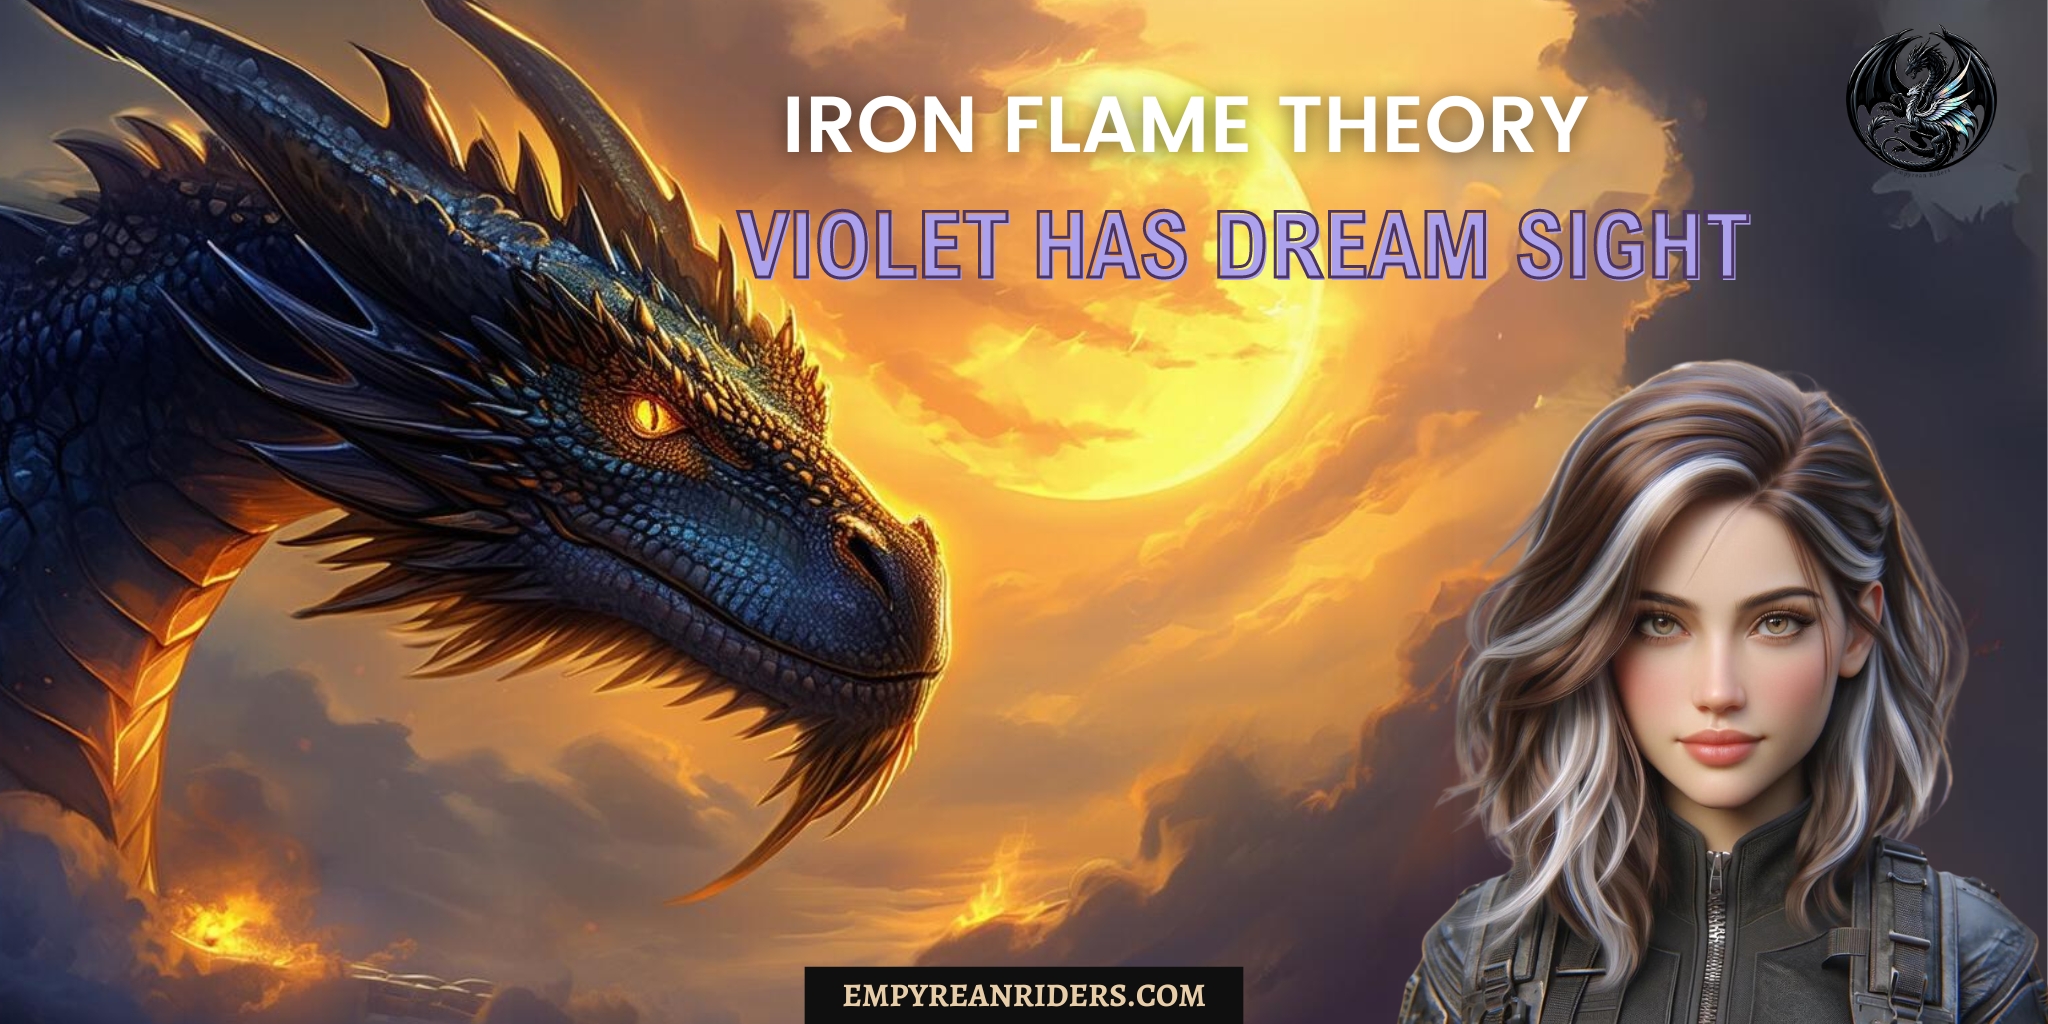 Iron Flame Theory – Violet’s second signet is dream-sight